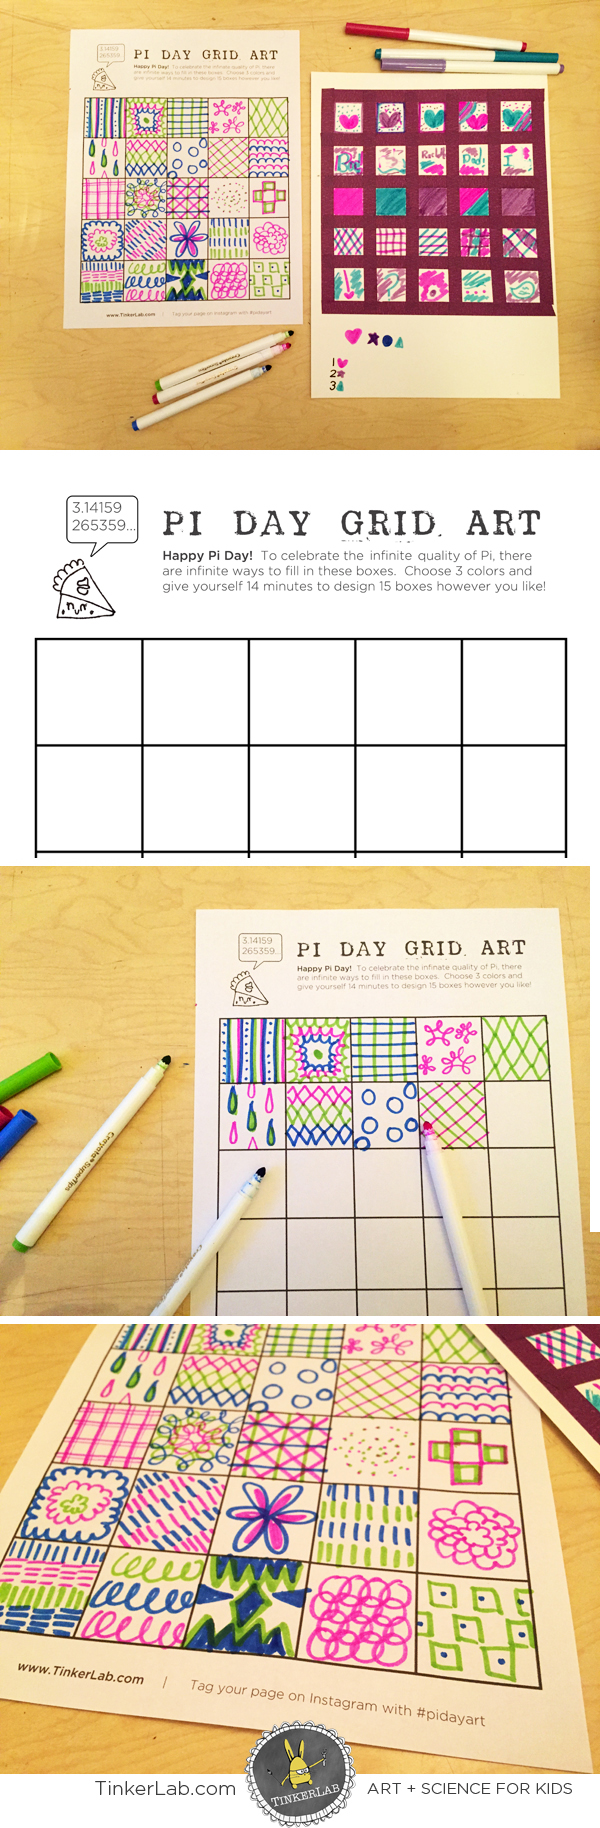 {Free Printable!} This fun and easy Pi Day Art Activity will get your creativity flowing, and it's a fun way to build enthusiasm around Pi Day 2015 | TinkerLab.com